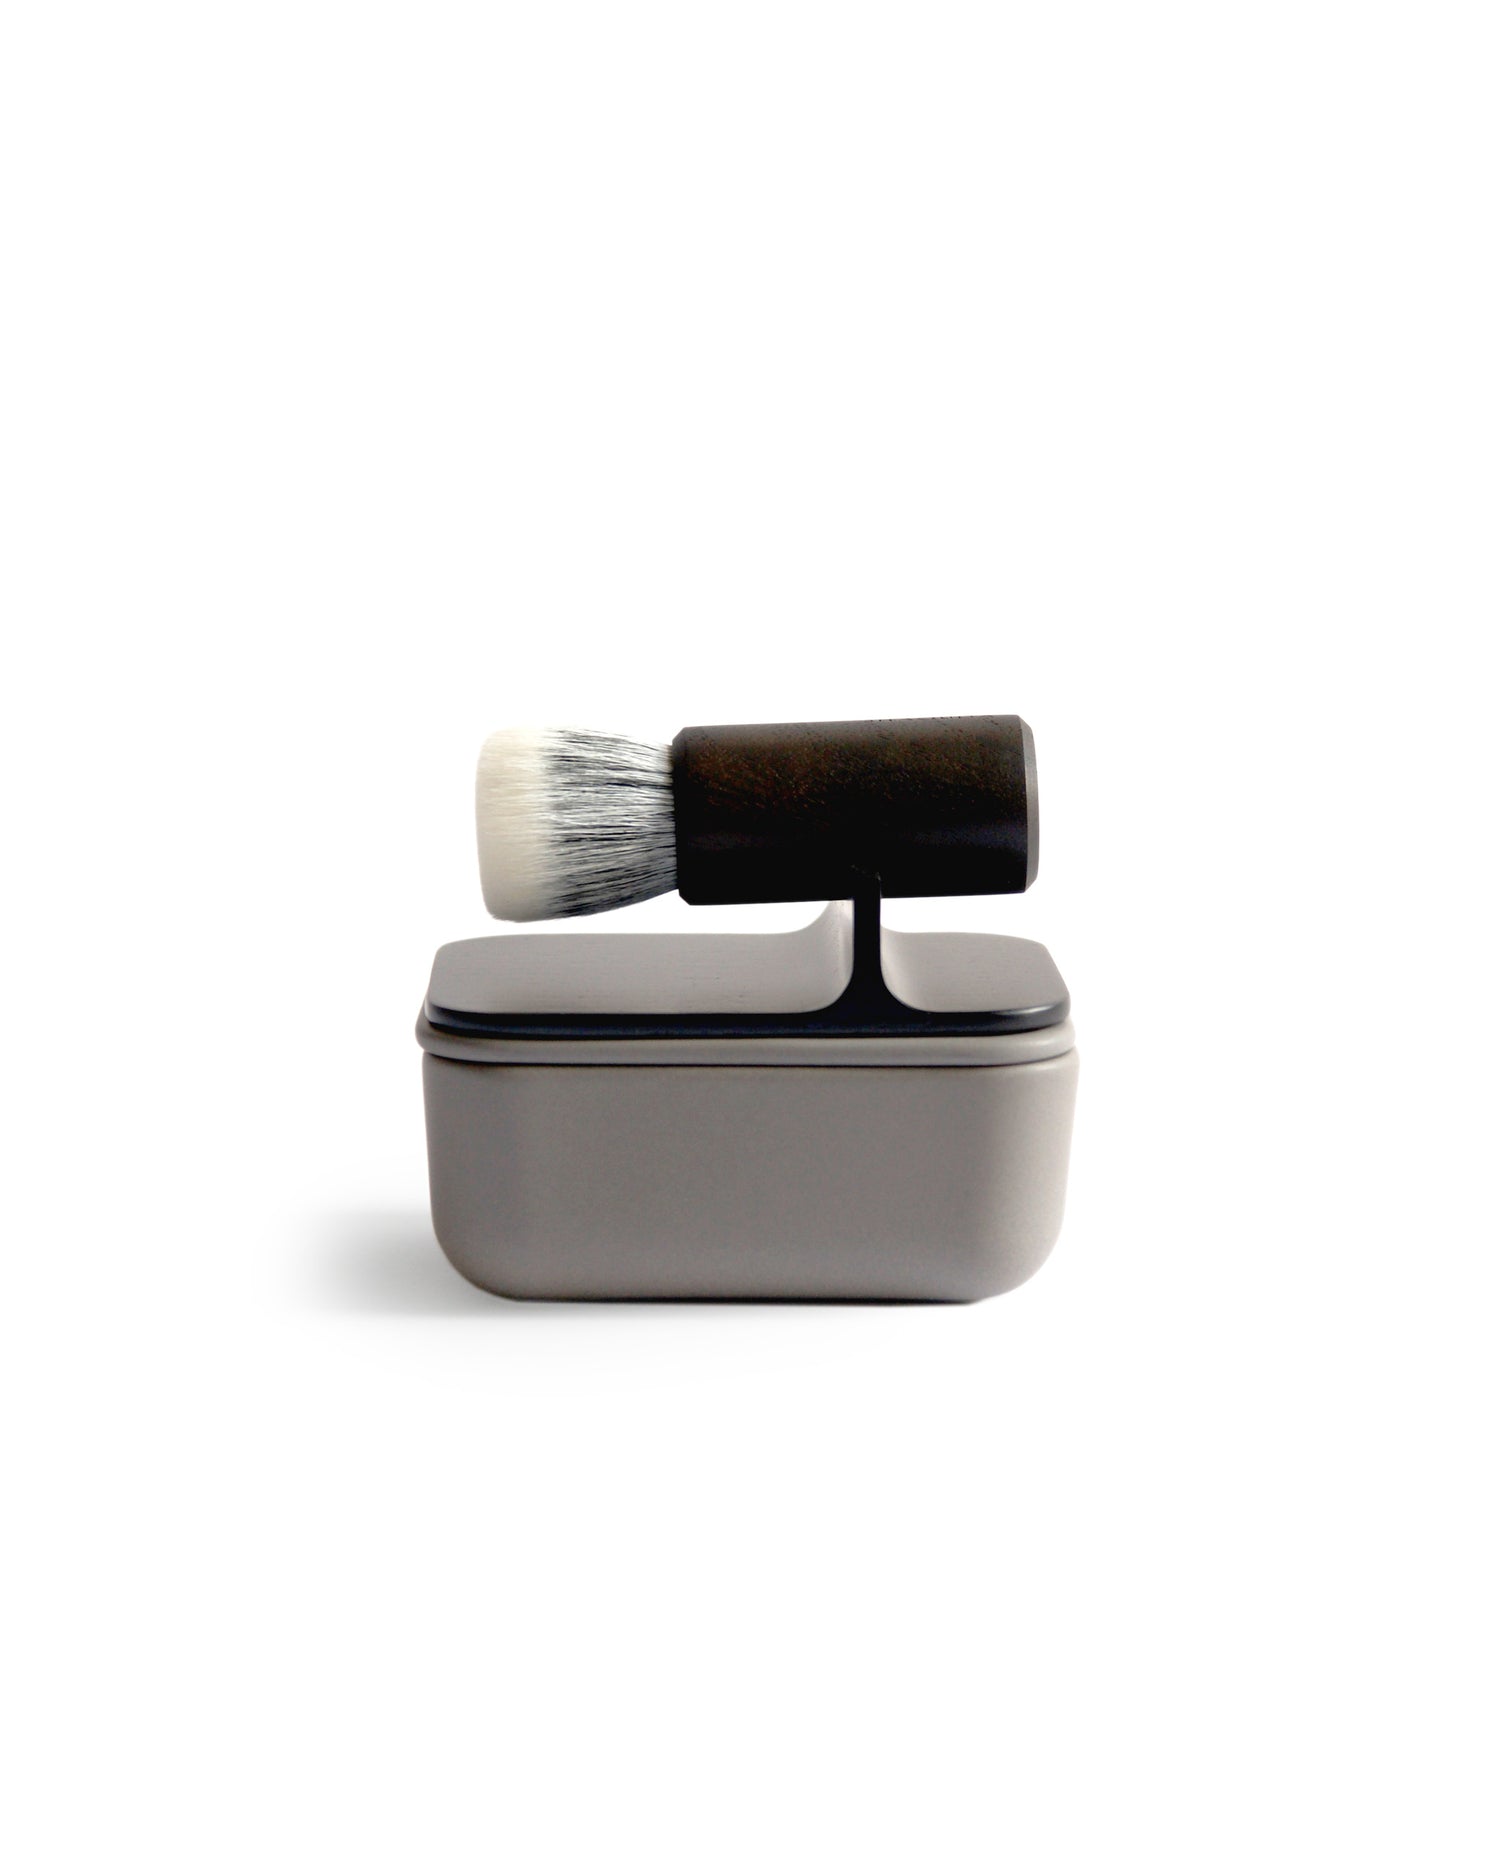 Silhouetted image of soft Jiva face cleansing and shaving series with porcelain bowl and walnut, boar bristle, and goat hair brush by Shaquda against white background.